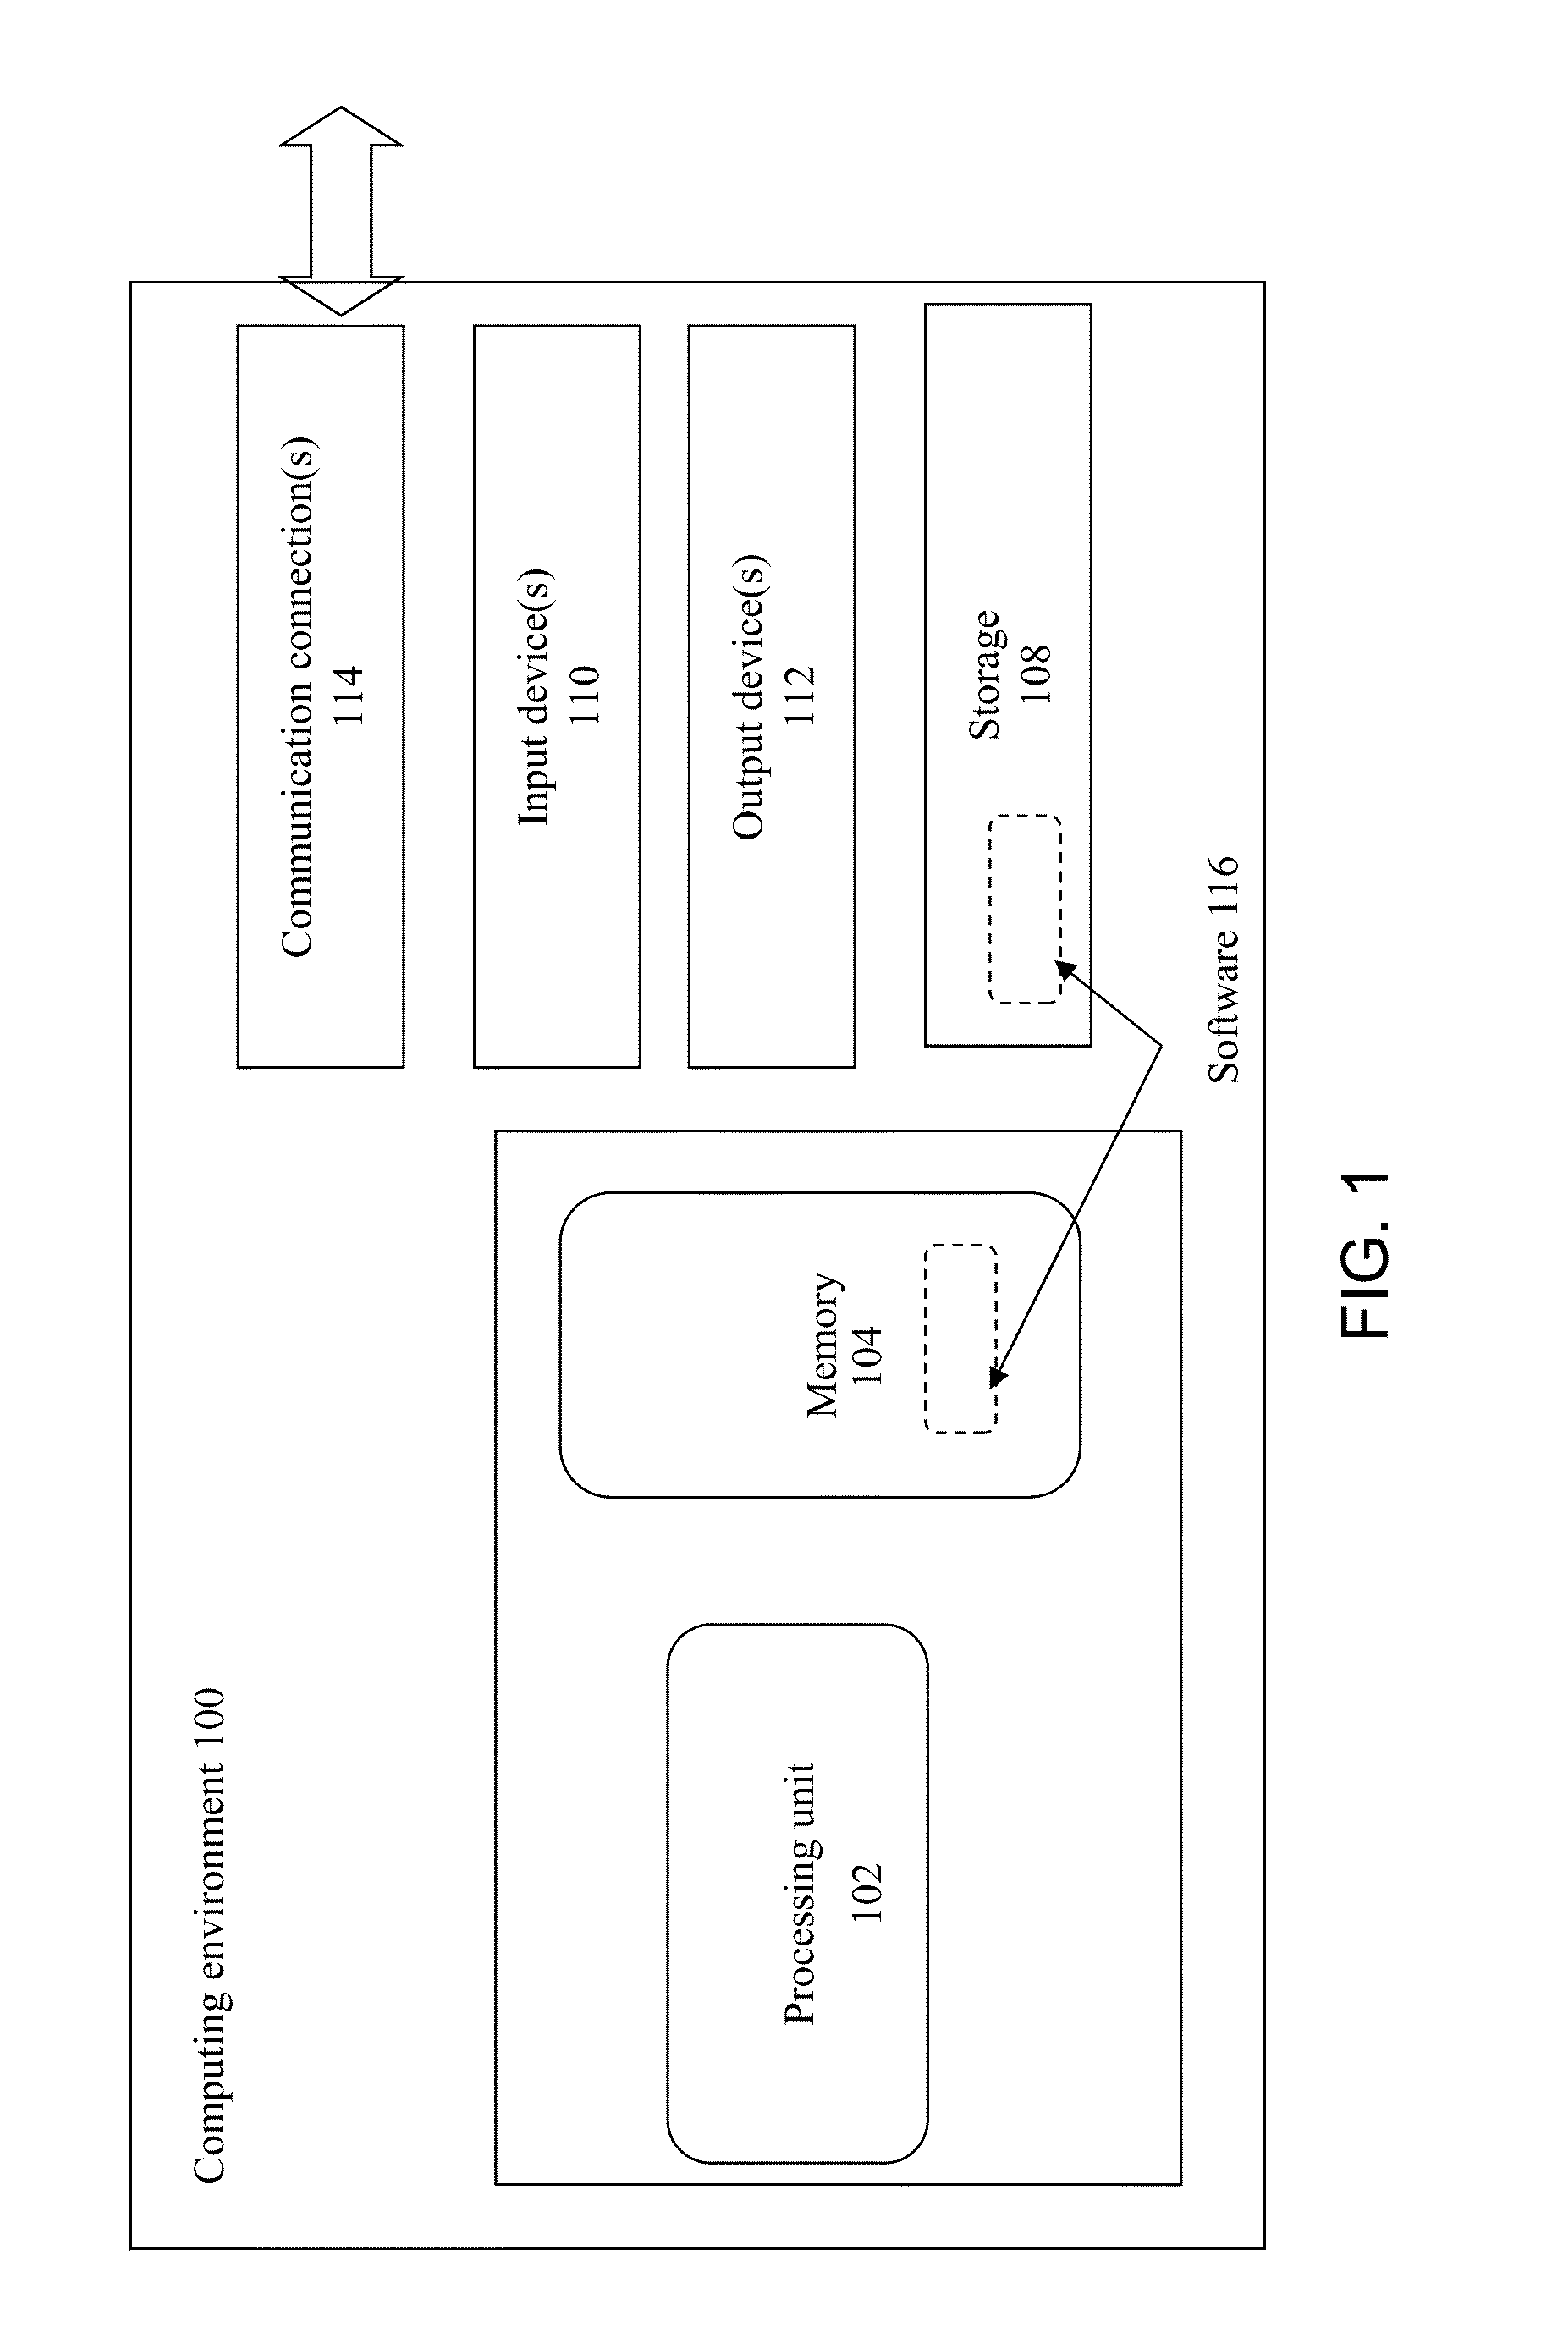 Systems and methods for correcting geometric distortions in videos and images